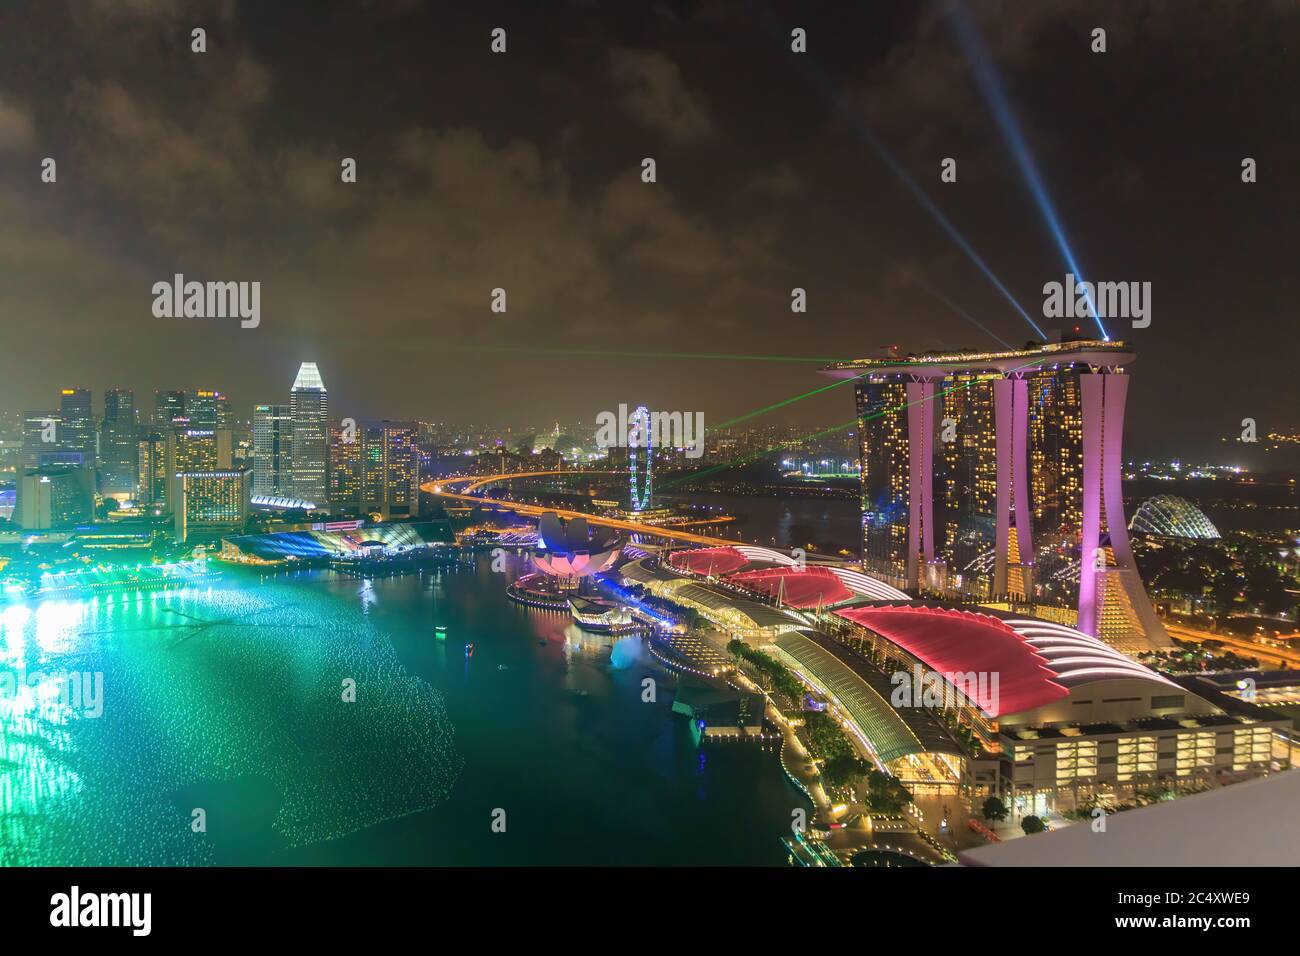 Singapore - CIRCA 2020: Skyline in Marina Bay, view of Art Museum, famous hotel and Singapore Flyer during the night with a stormy sky on the backgrou Stock Photo